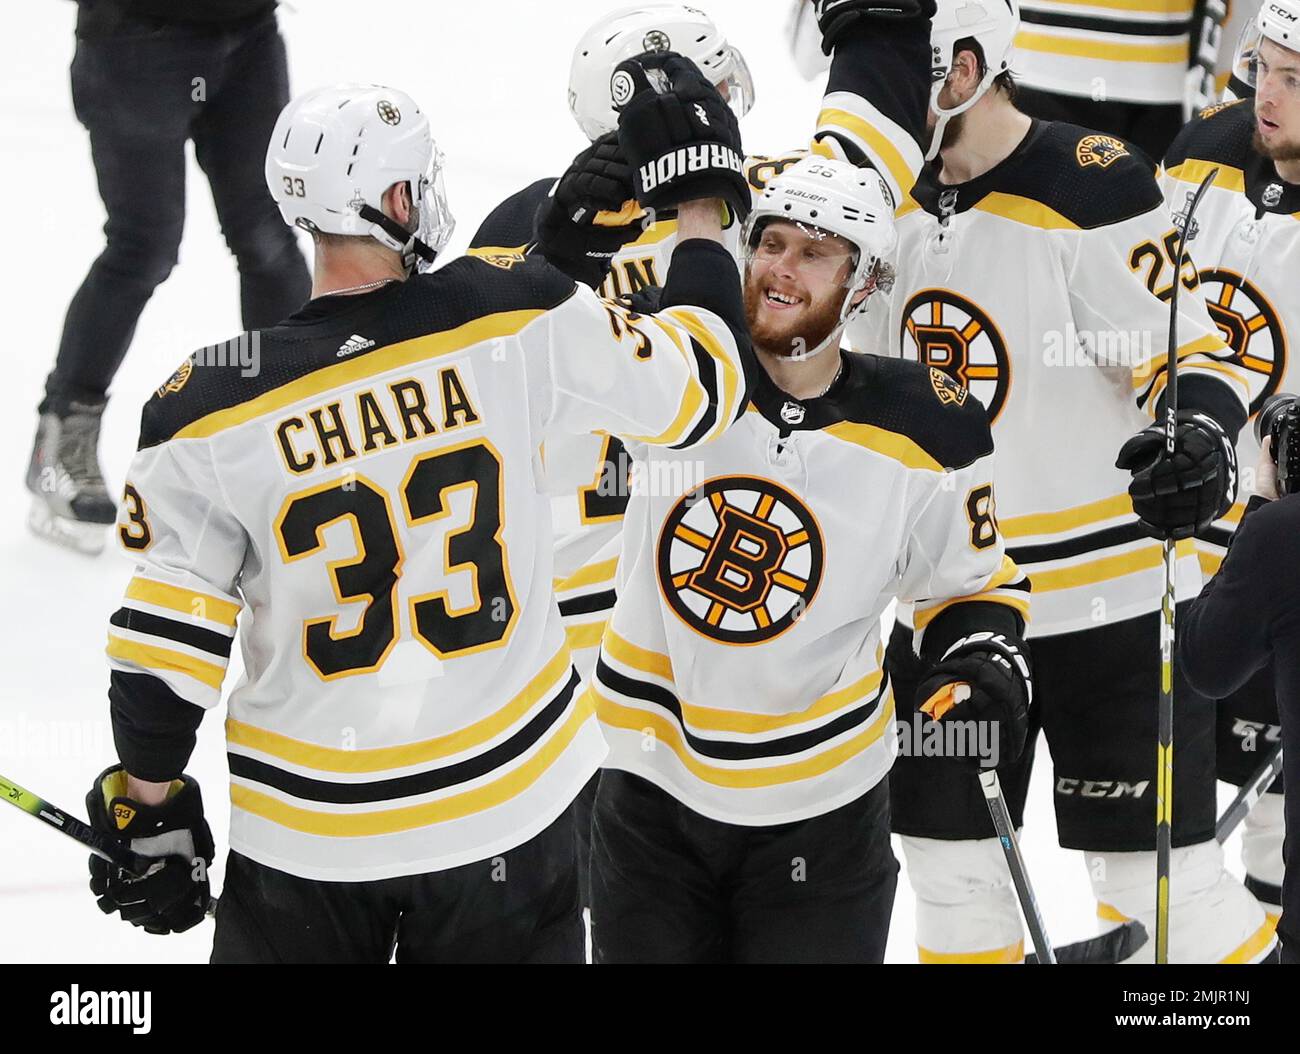 June 15, 2011; Vancouver, BC, CANADA; Boston Bruins defenseman Zdeno Chara  (33) celebrates after defeating the Vancouver Canucks 4-0 in game seven of  the 2011 Stanley Cup Finals at Rogers Arena Stock Photo - Alamy